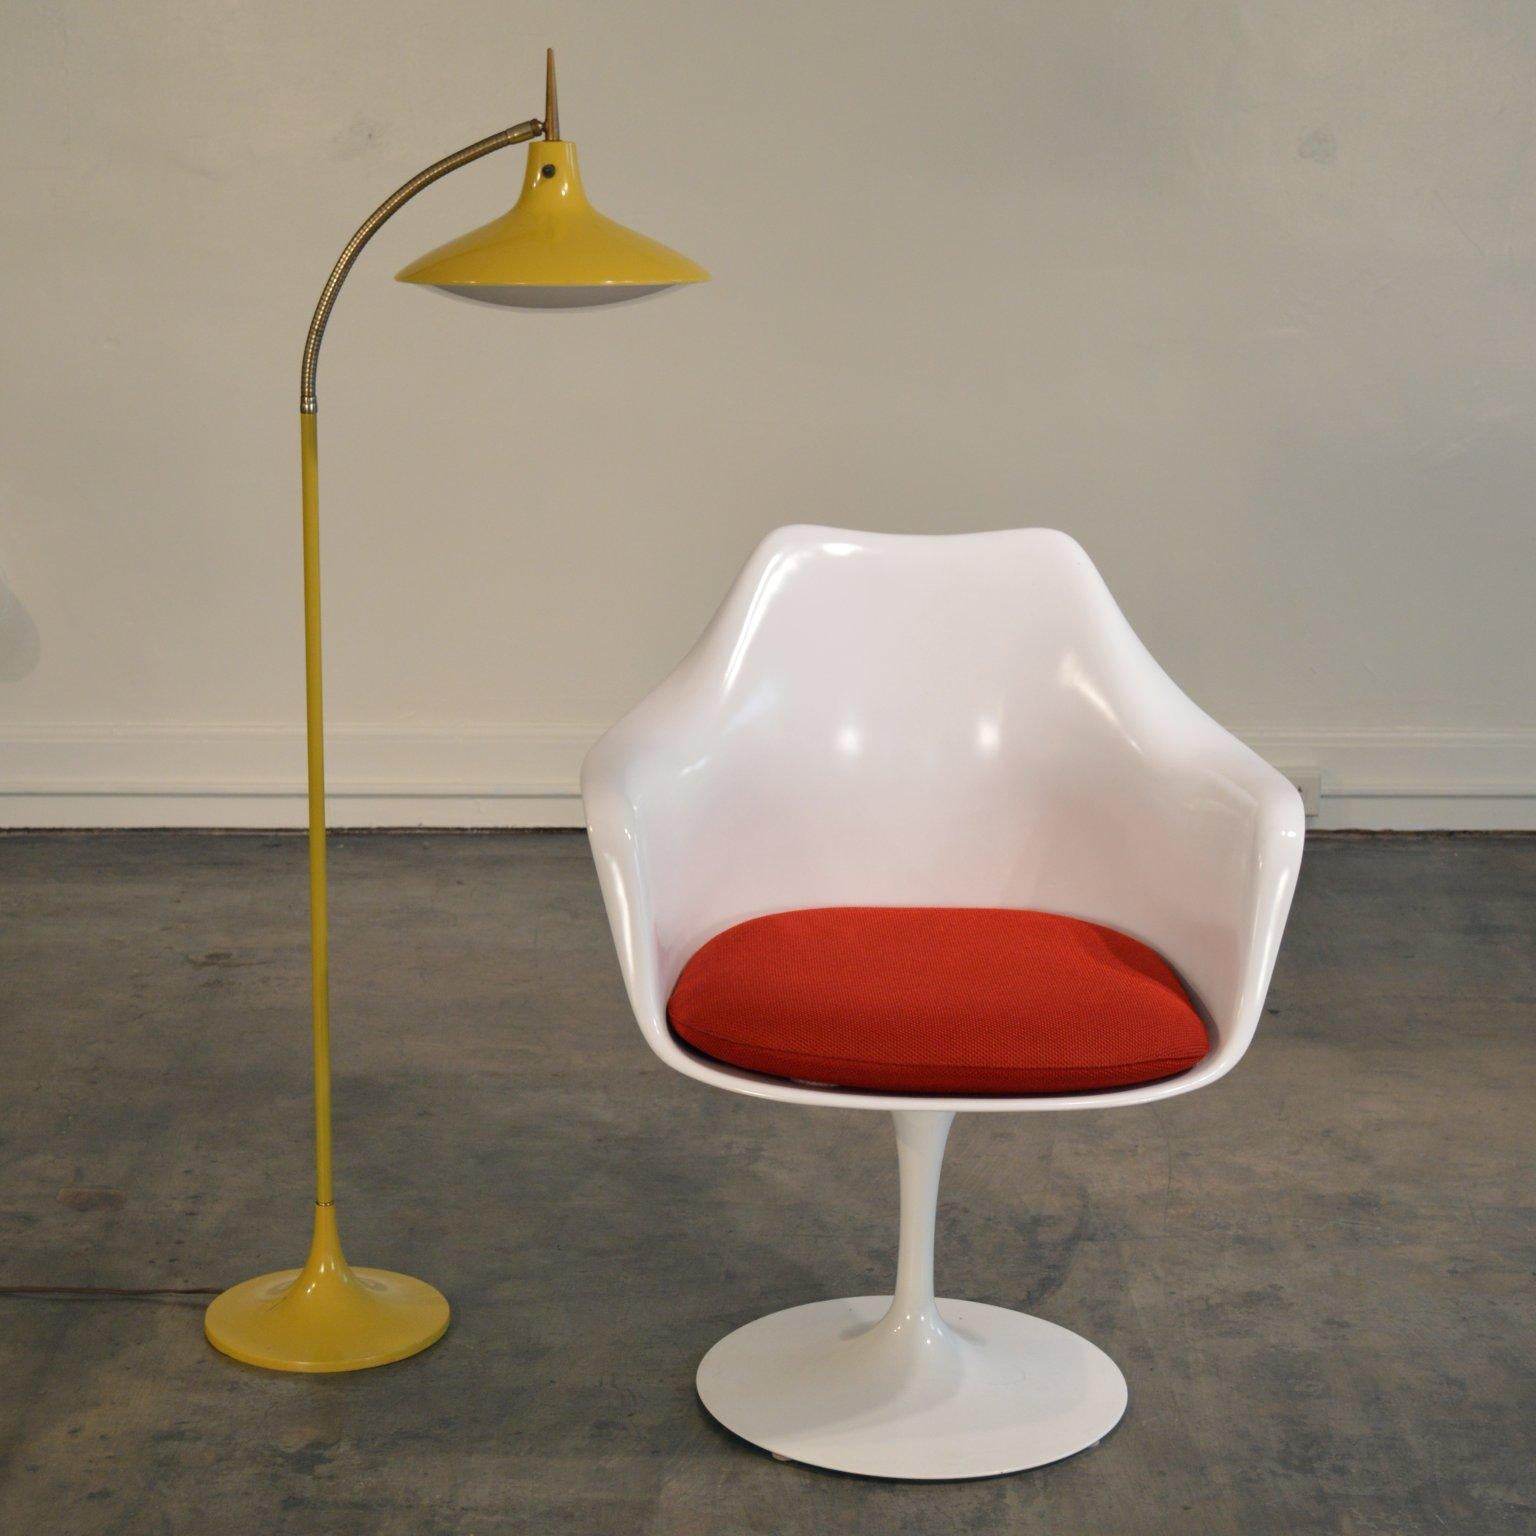 Mid-Century Yellow floor Lamp designed by Richard Barr and Harold Weiss for the Laurel Lamp Company circa 1965. Original 'Mustard' Color, Model B-683, UFO shaped floor lamp on brass articulating gooseneck with tulip-shaped enameled metal base.